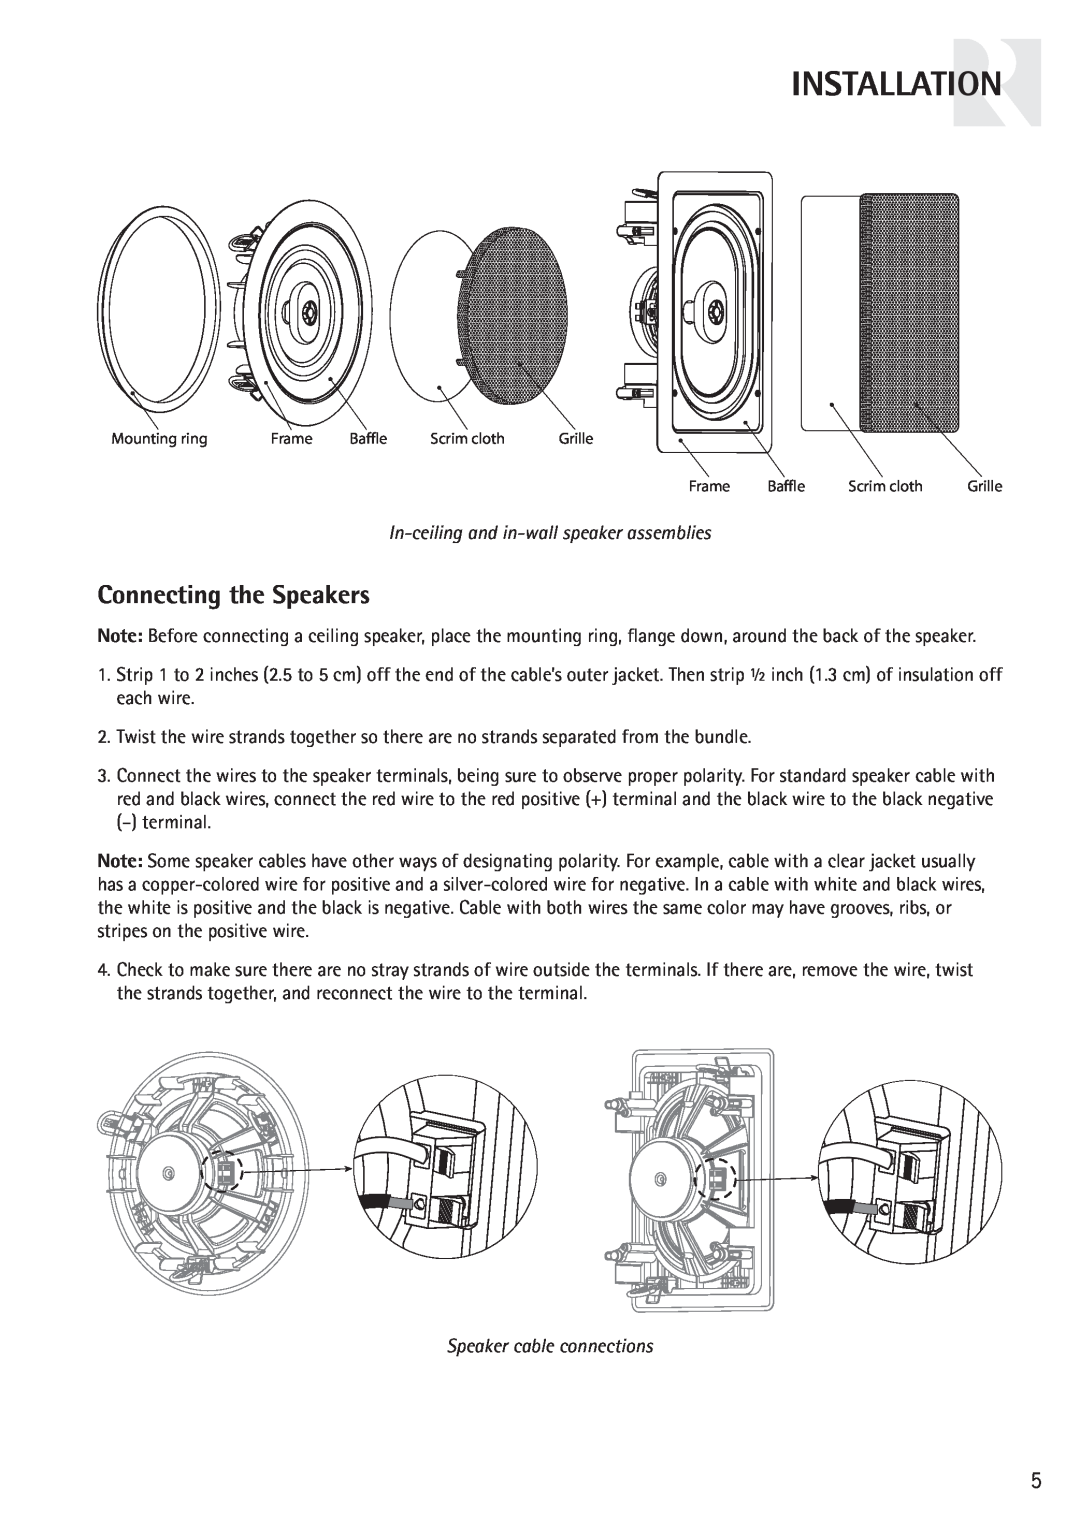 Russound RC61S instruction manual Installation, Connecting the Speakers 